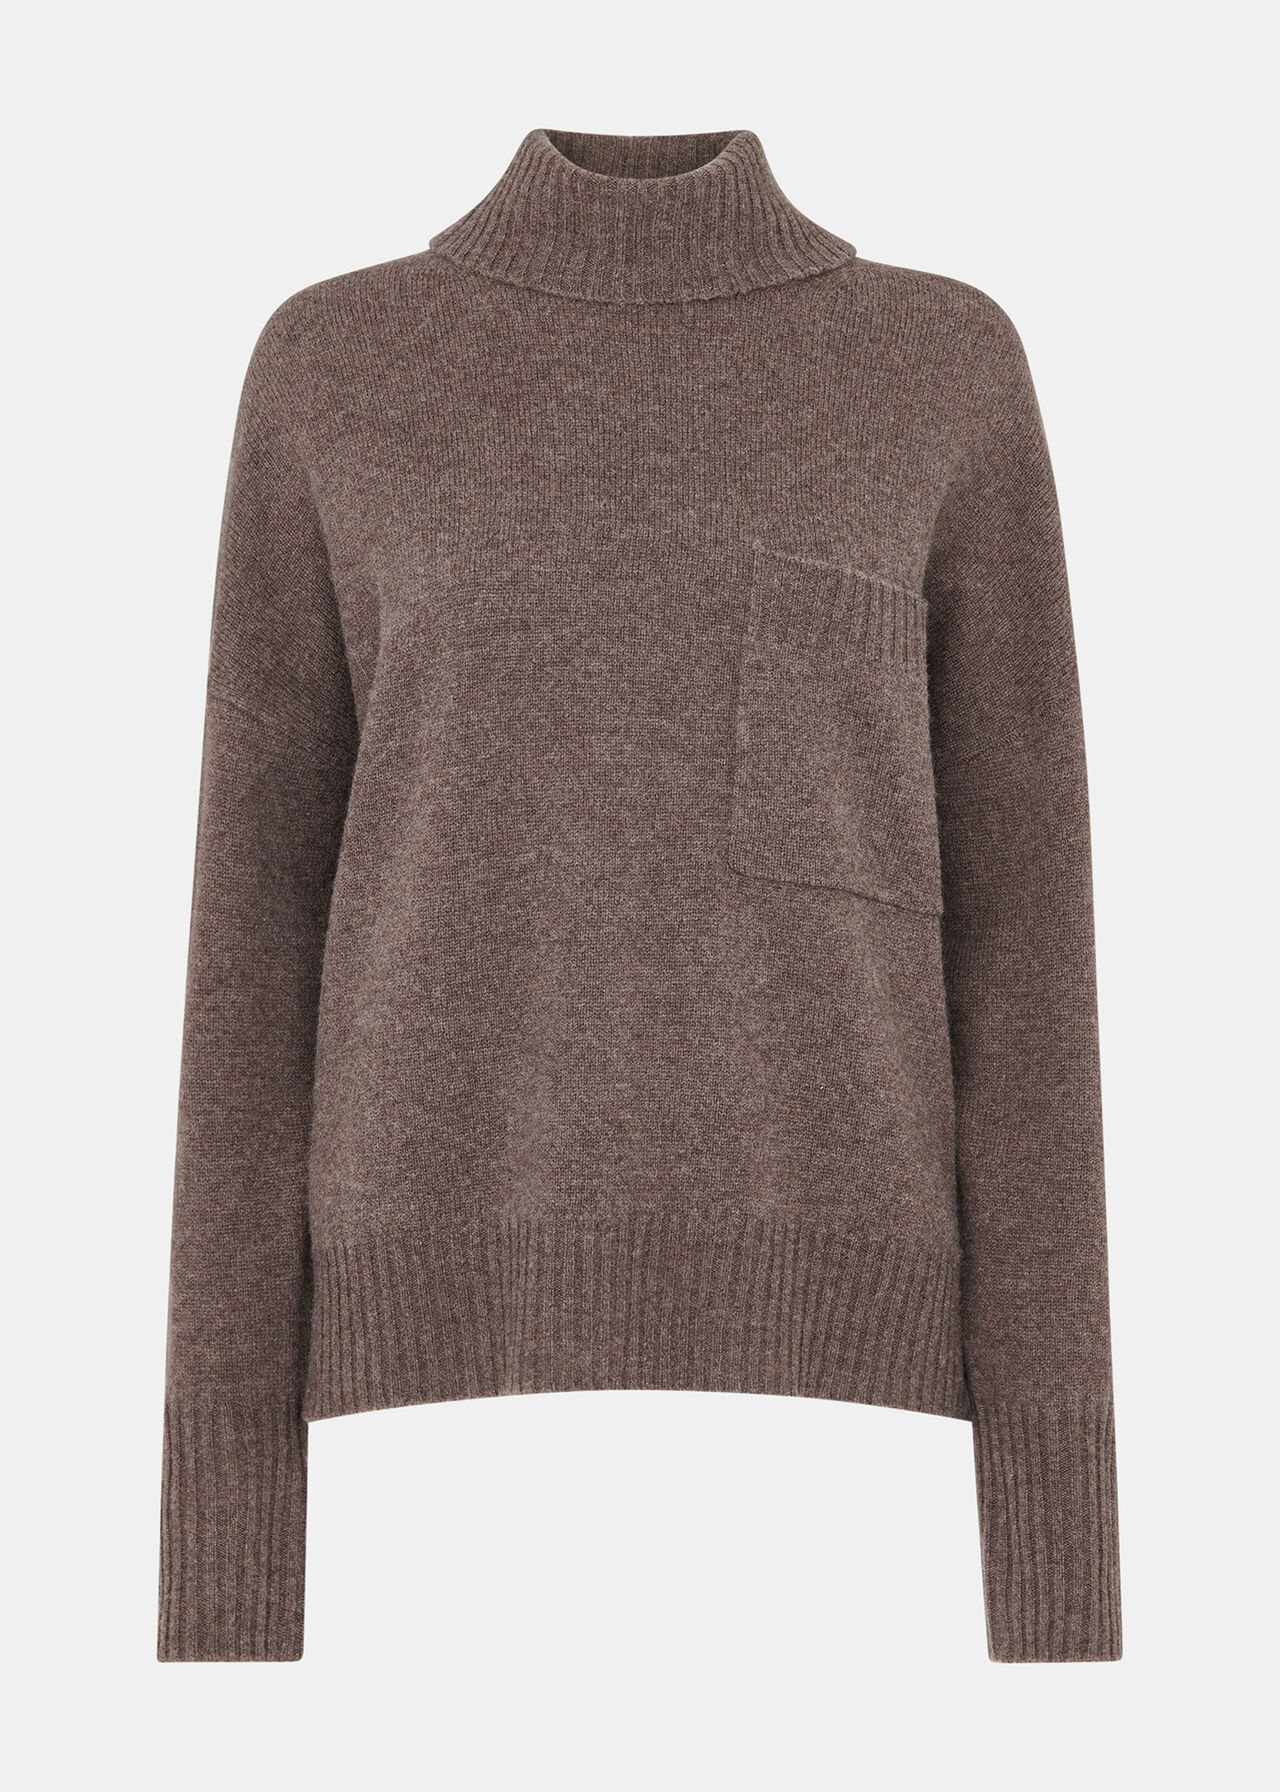 Chocolate Wool Roll Neck Pocket Sweater | WHISTLES